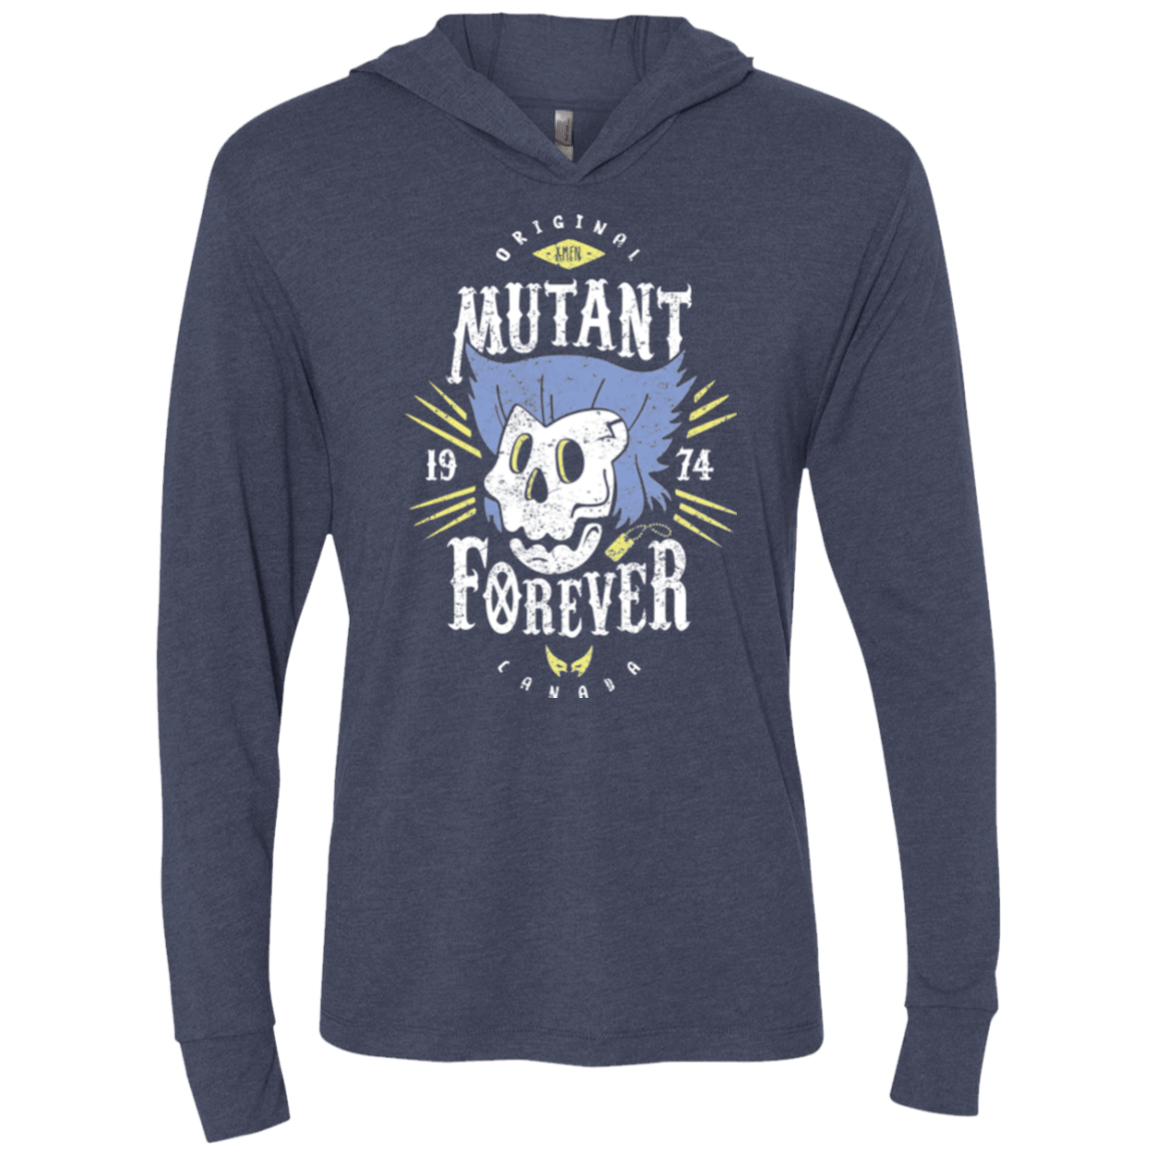 T-Shirts Vintage Navy / X-Small Mutant Forever Triblend Long Sleeve Hoodie Tee